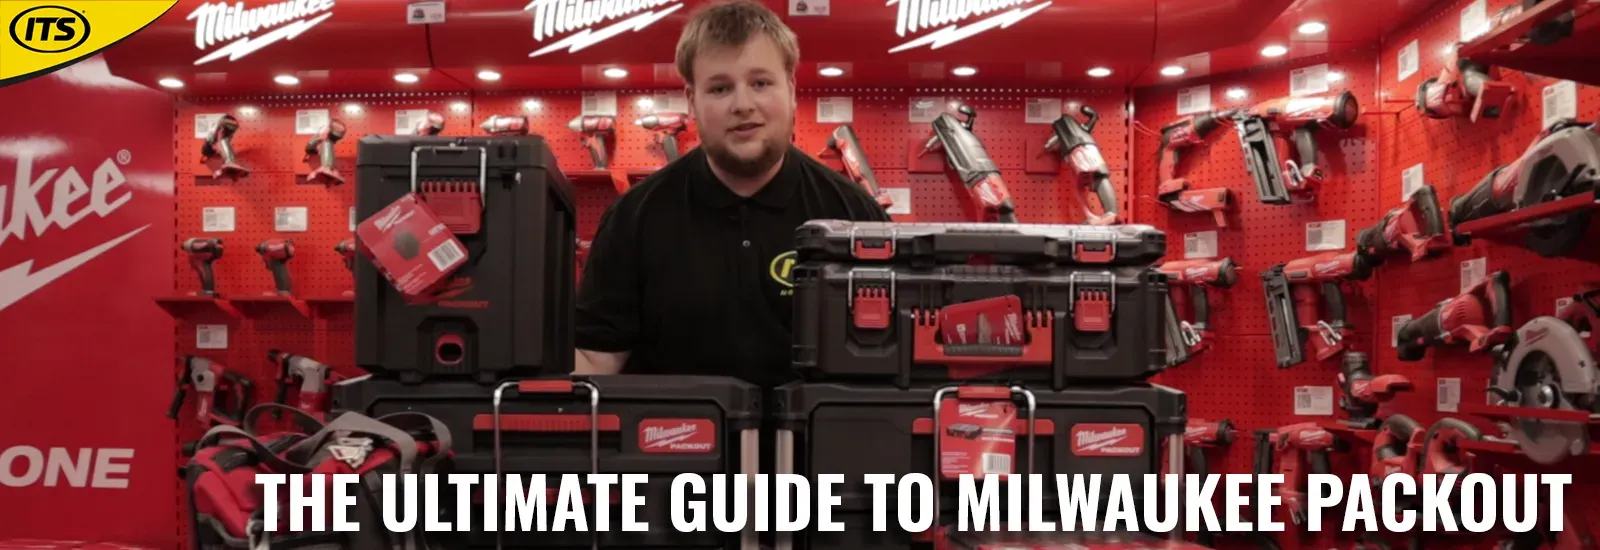 A GUIDE TO EVERYTHING MILWAUKEE PACKOUT